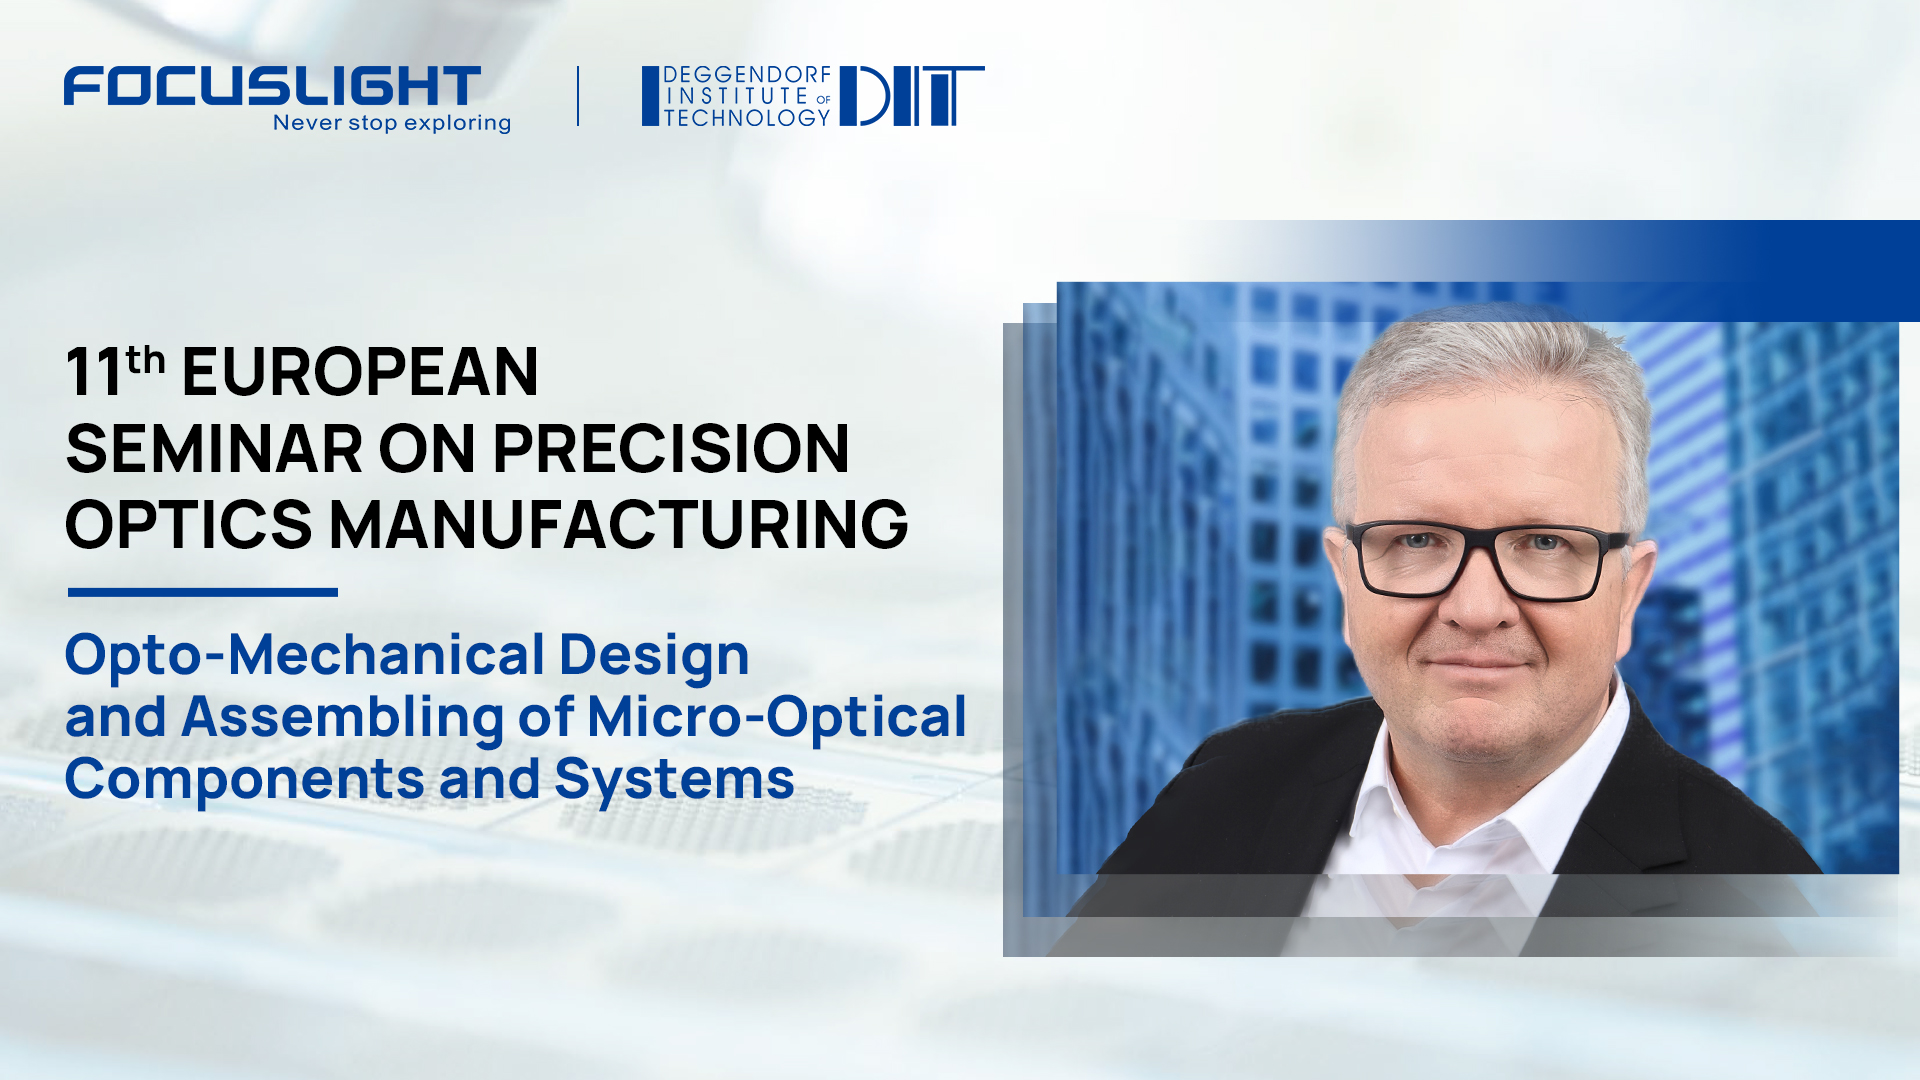  Presentation | Opto-Mechanical Design and Assembling of Micro-Optical Components and Systems